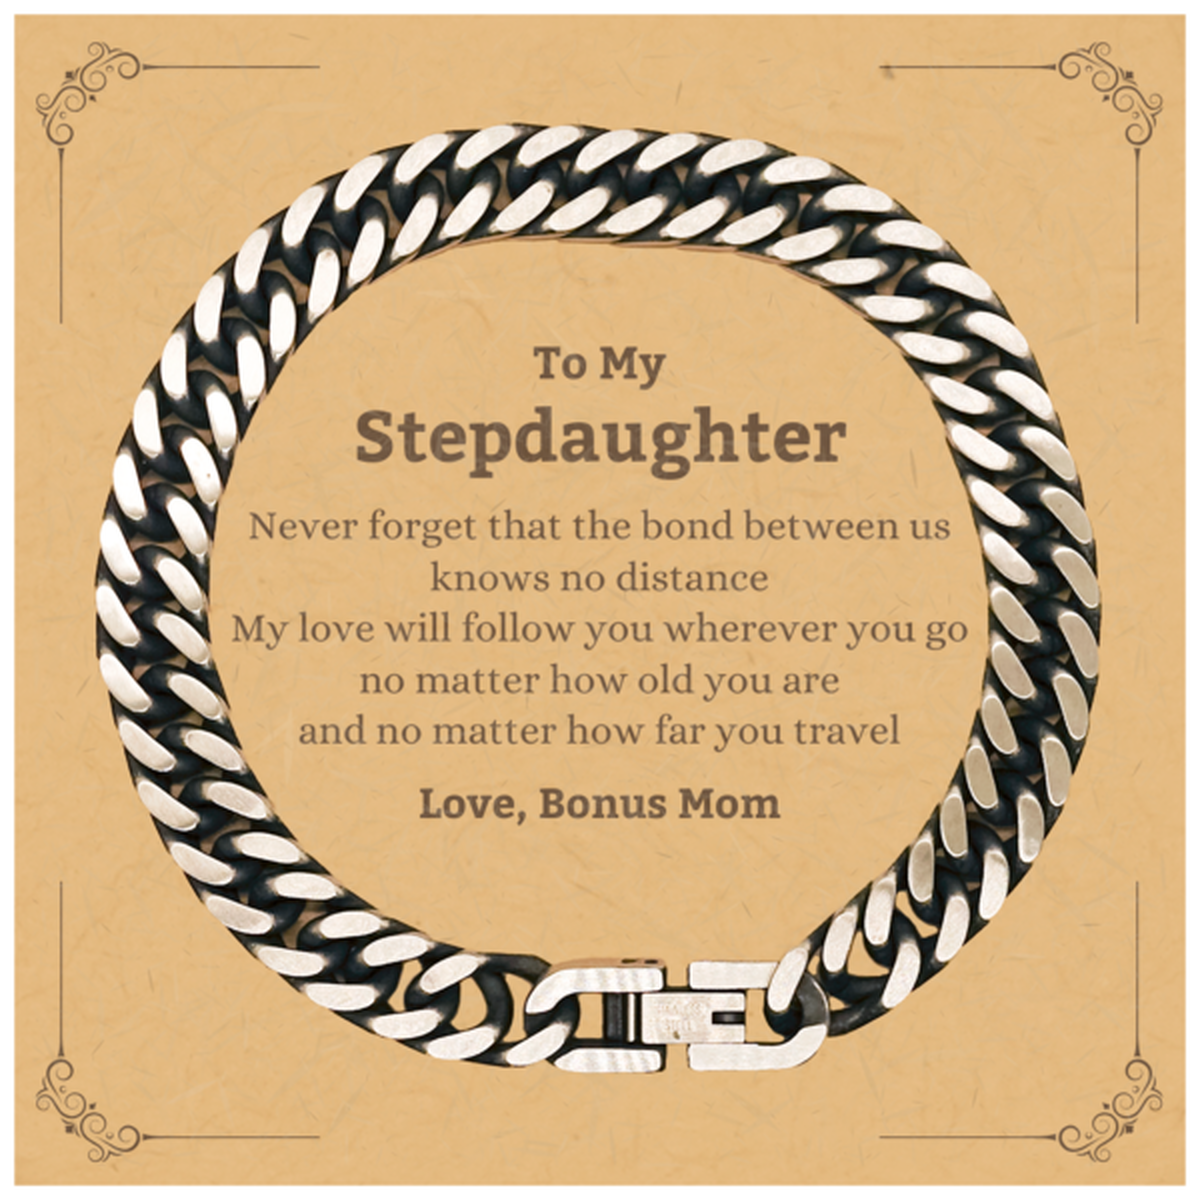 Stepdaughter Birthday Gifts from Bonus Mom, Adjustable Cuban Link Chain Bracelet for Stepdaughter Christmas Graduation Unique Gifts Stepdaughter Never forget that the bond between us knows no distance. Love, Bonus Mom